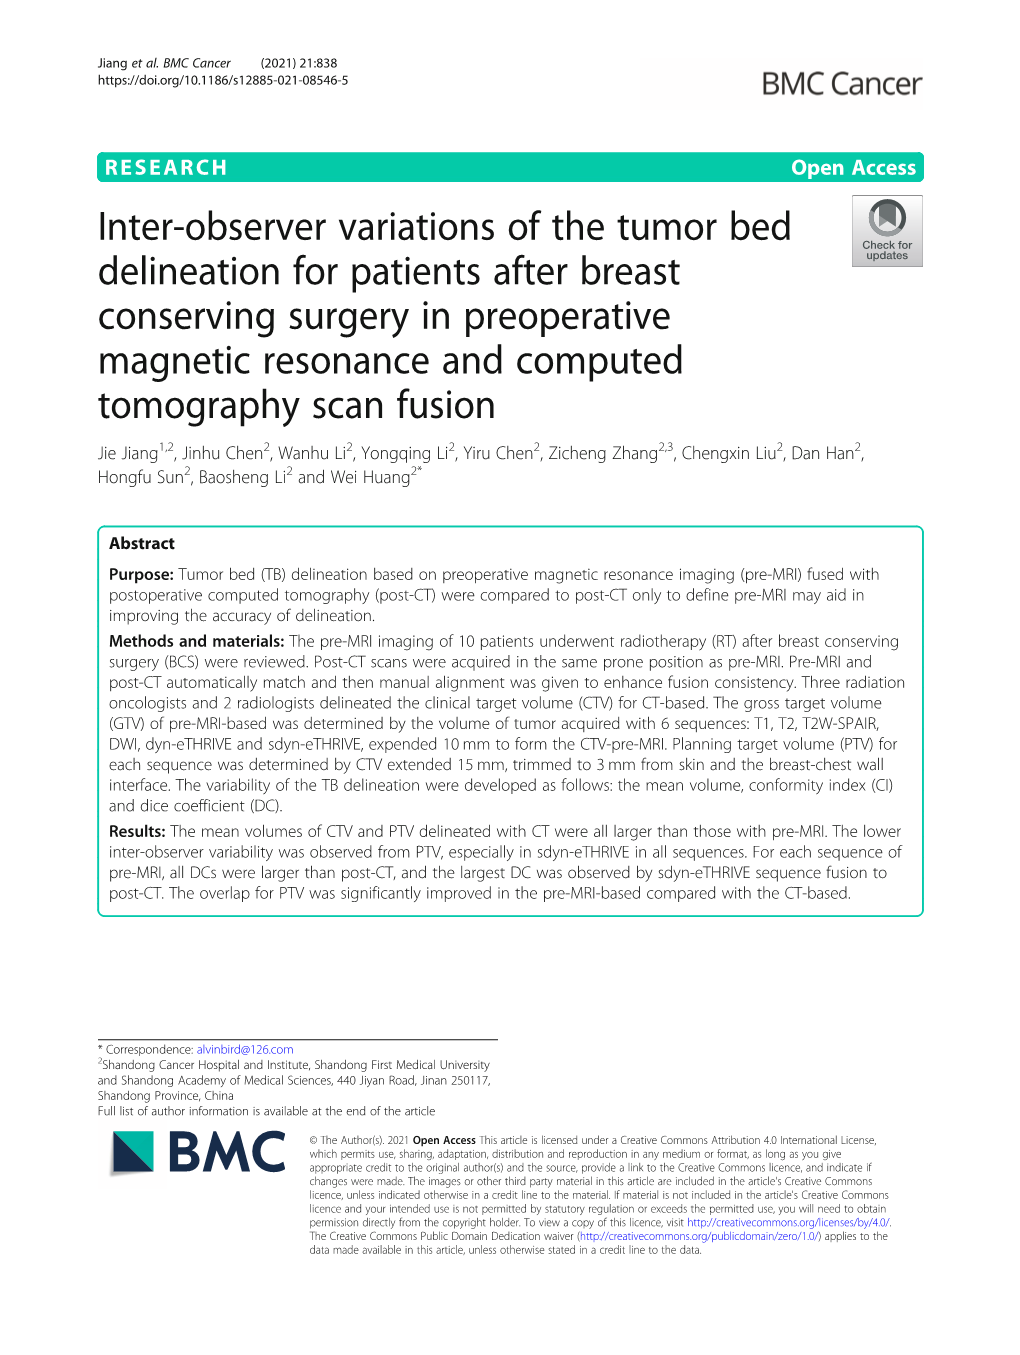 Inter-Observer Variations of the Tumor Bed Delineation For